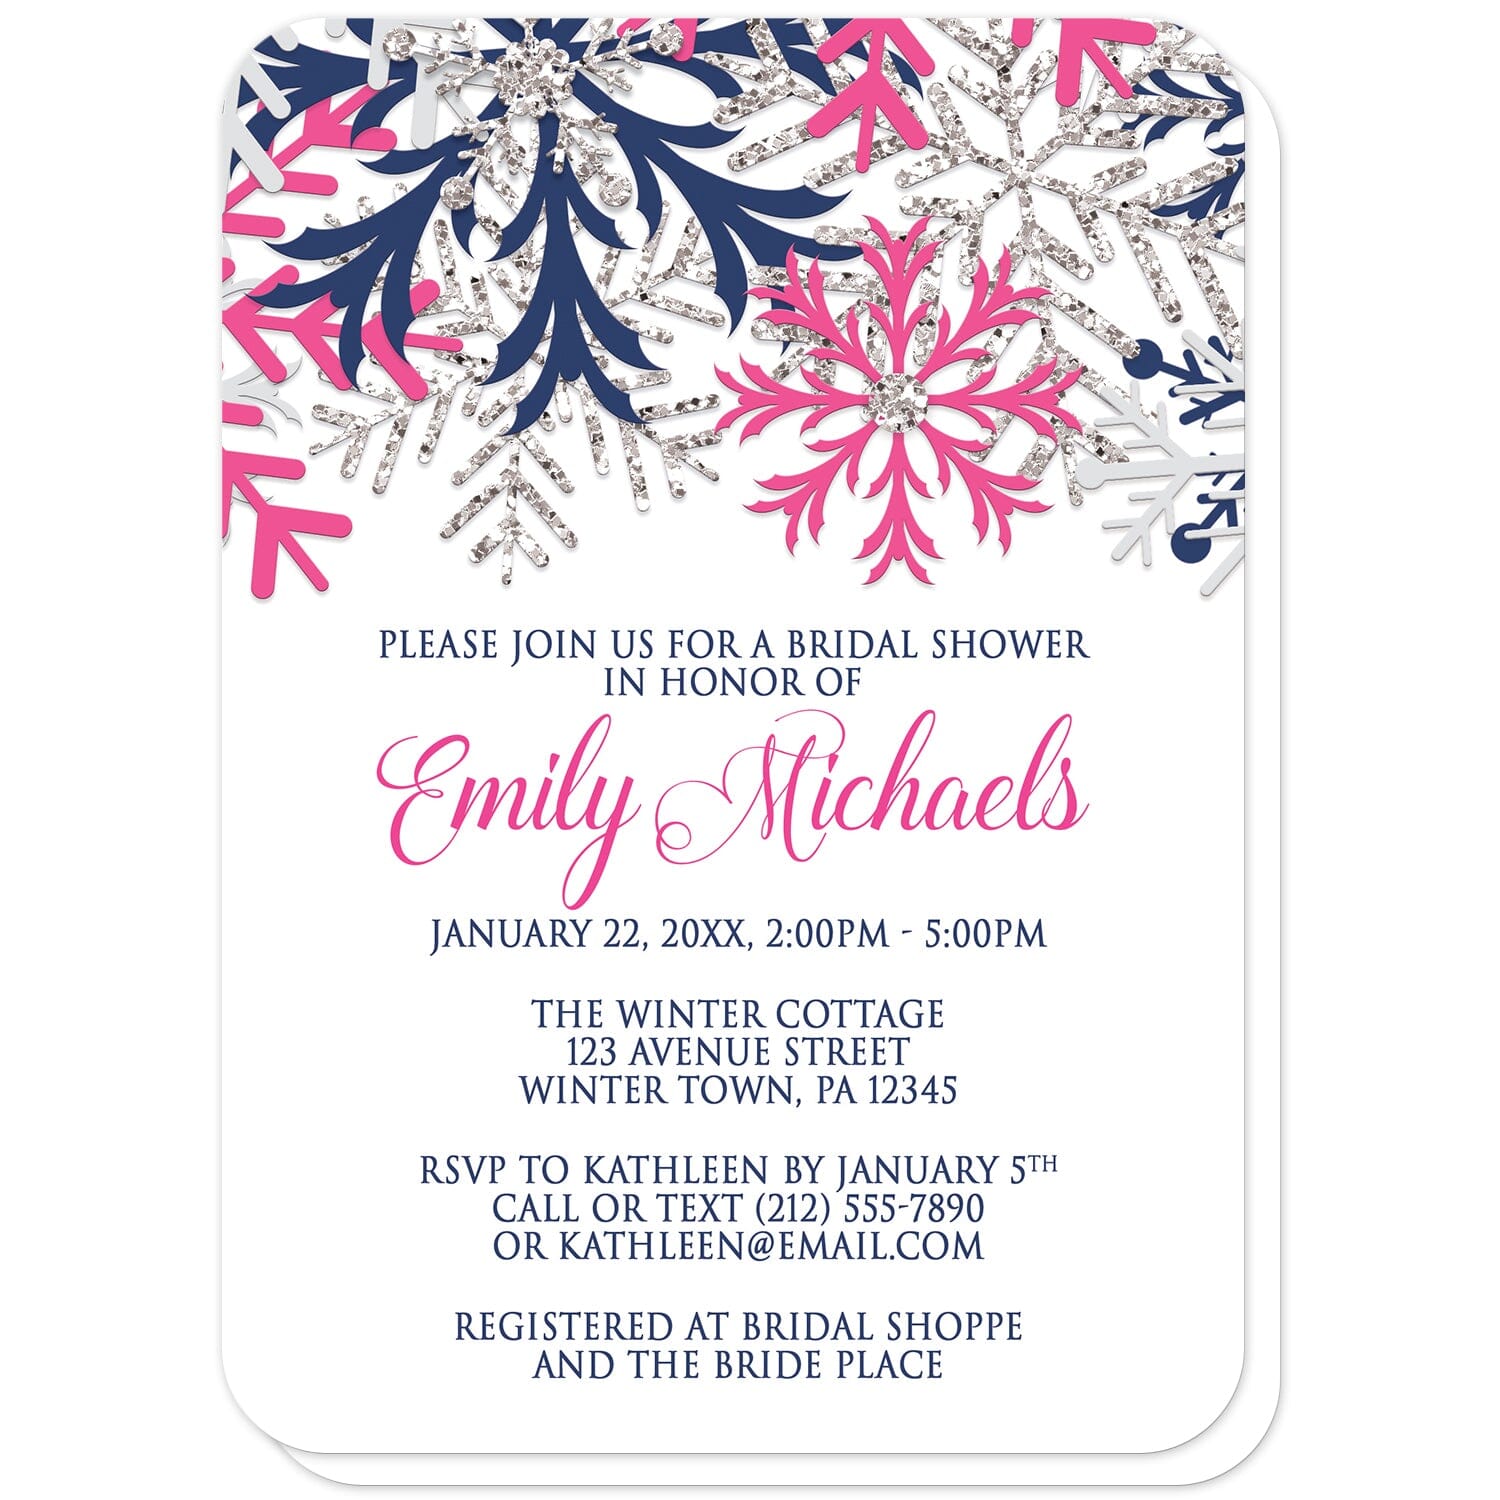 Winter Navy Fuchsia Snowflake Bridal Shower Invitations (with rounded corners) at Artistically Invited. Beautiful winter navy fuchsia snowflake bridal shower invitations designed with navy blue, fuchsia pink, silver-colored glitter-illustrated, and light gray snowflakes along the top over a white background. Your personalized bridal shower celebration details are custom printed in navy blue and fuchsia below the pretty snowflakes.